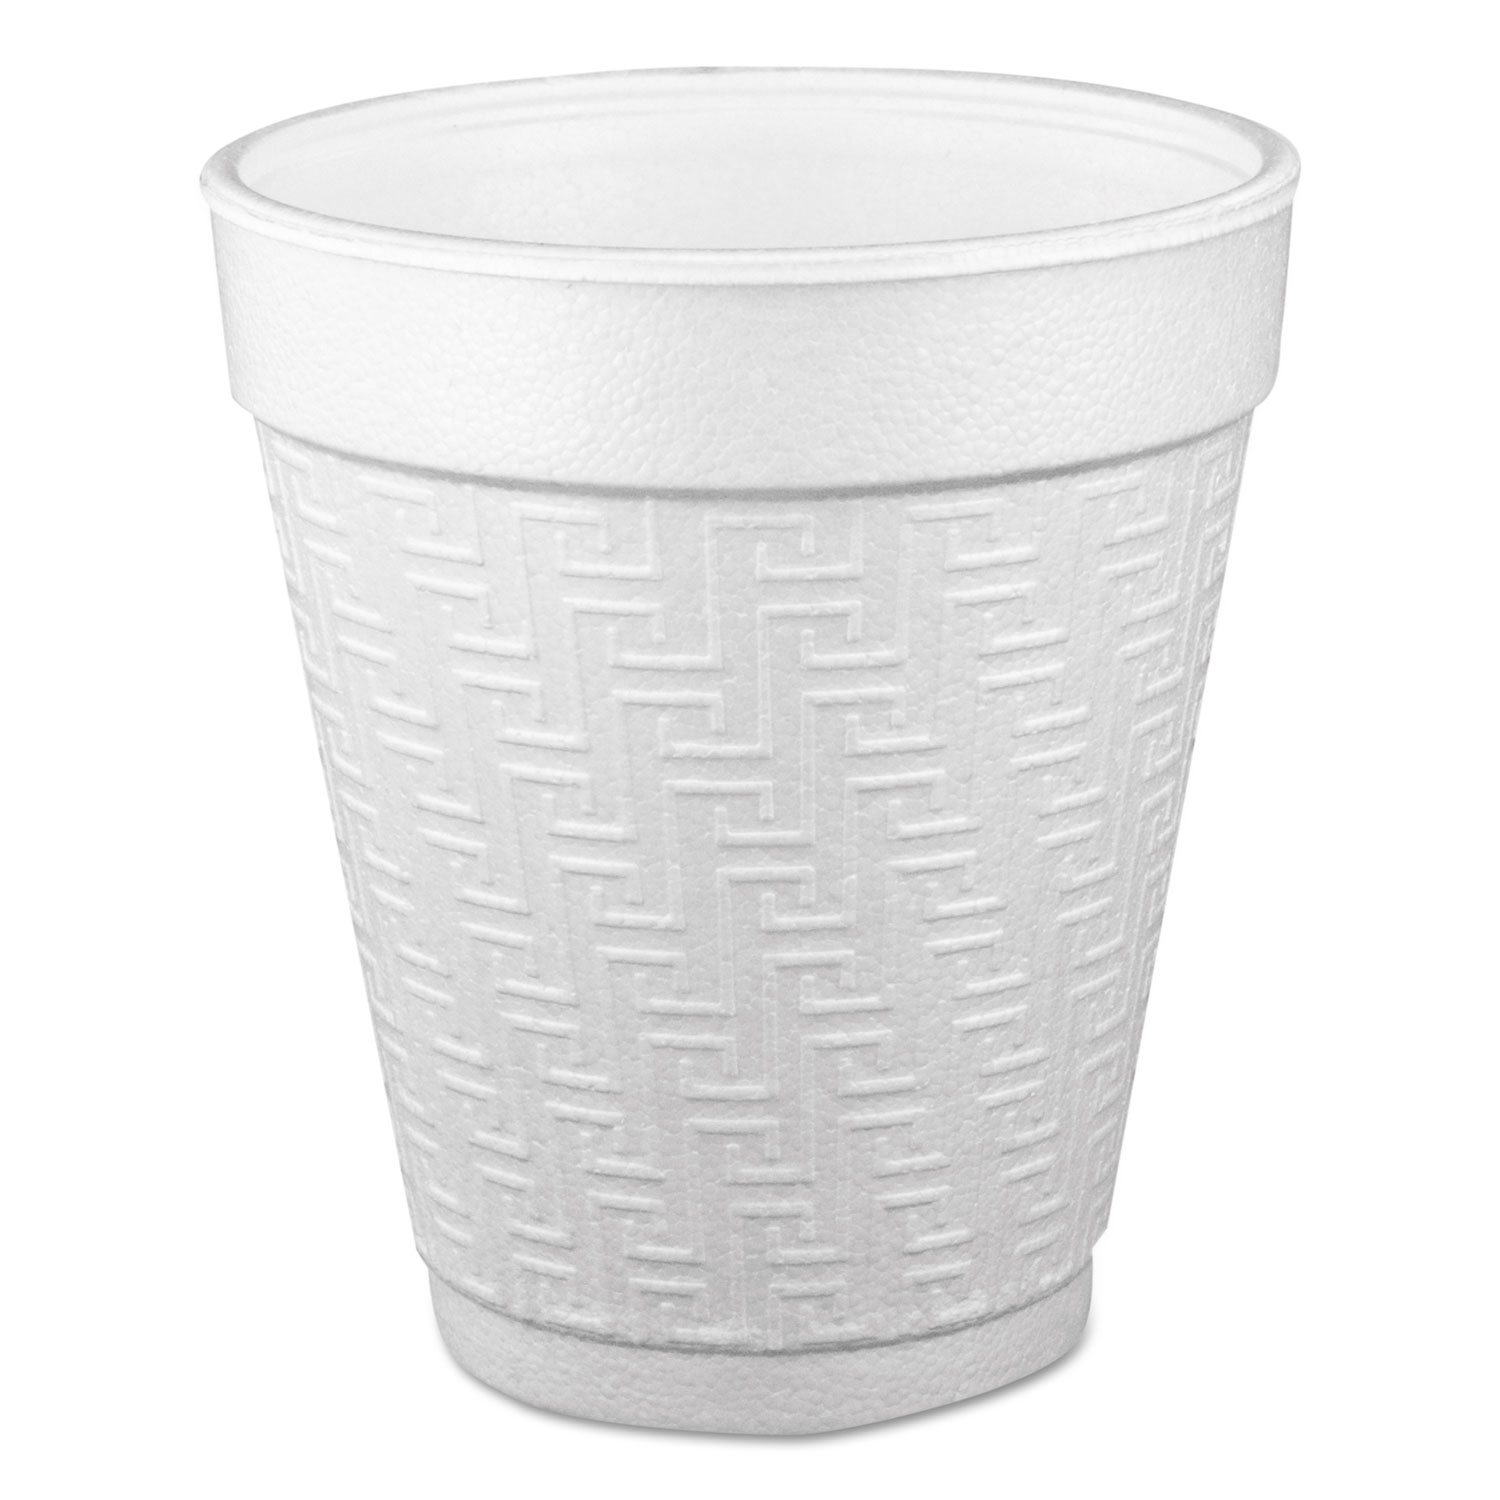  Dart 10KY10 Small Foam Drink Cup, 10 oz, Hot/Cold, White, 25/Bag, 40 Bags/Carton (DCC10KY10) 